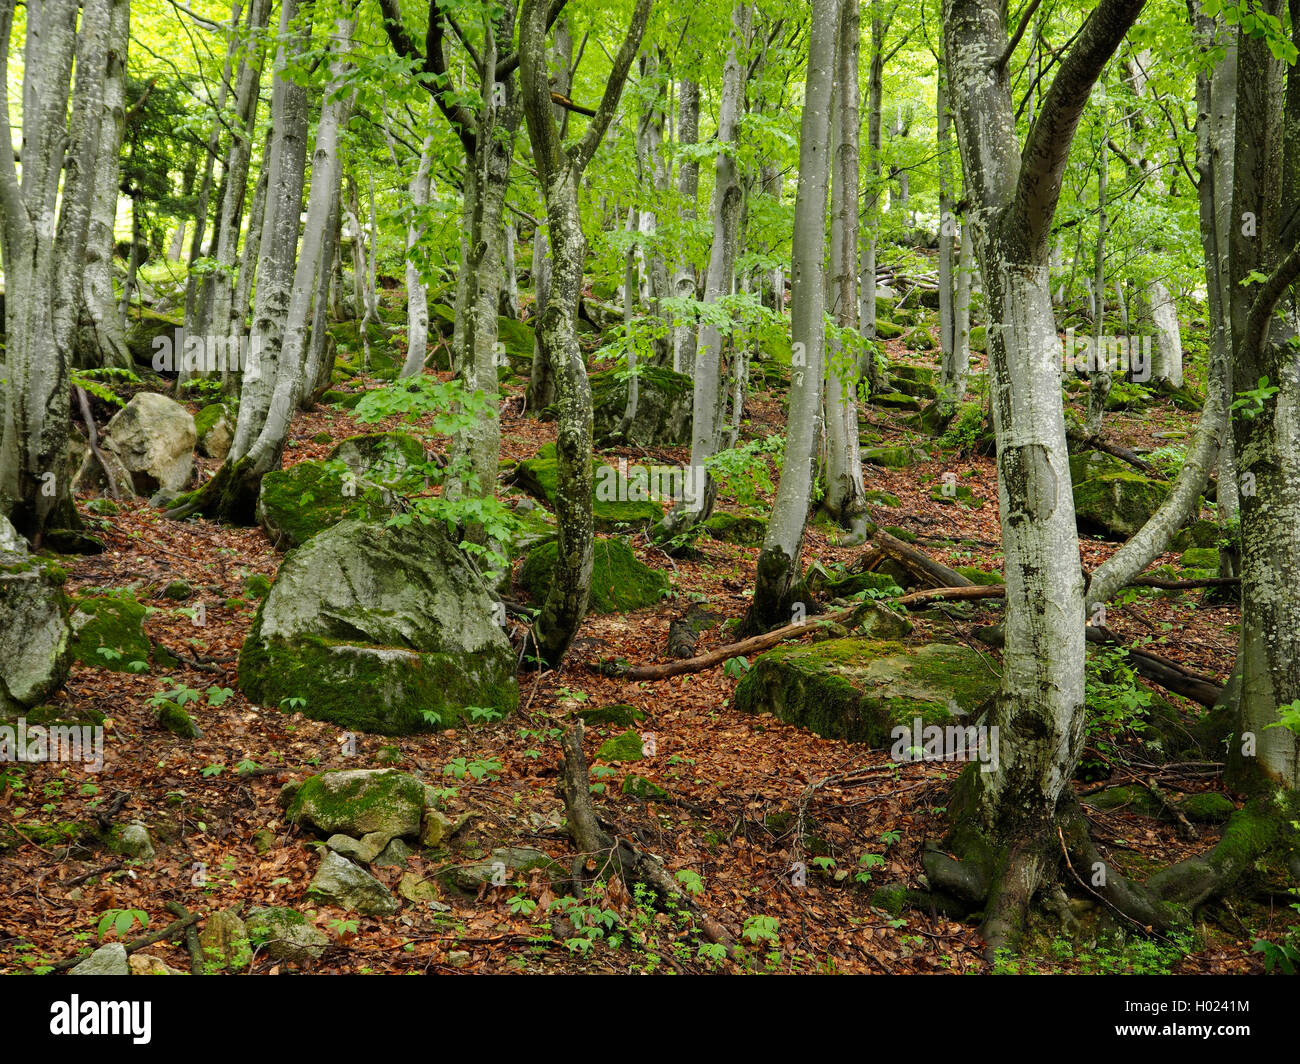 common beech (Fagus sylvatica), beech forest in the Maritime Alps in spring, Italy, Parco Naturale Alpi Marittime, Valdieri Stock Photo